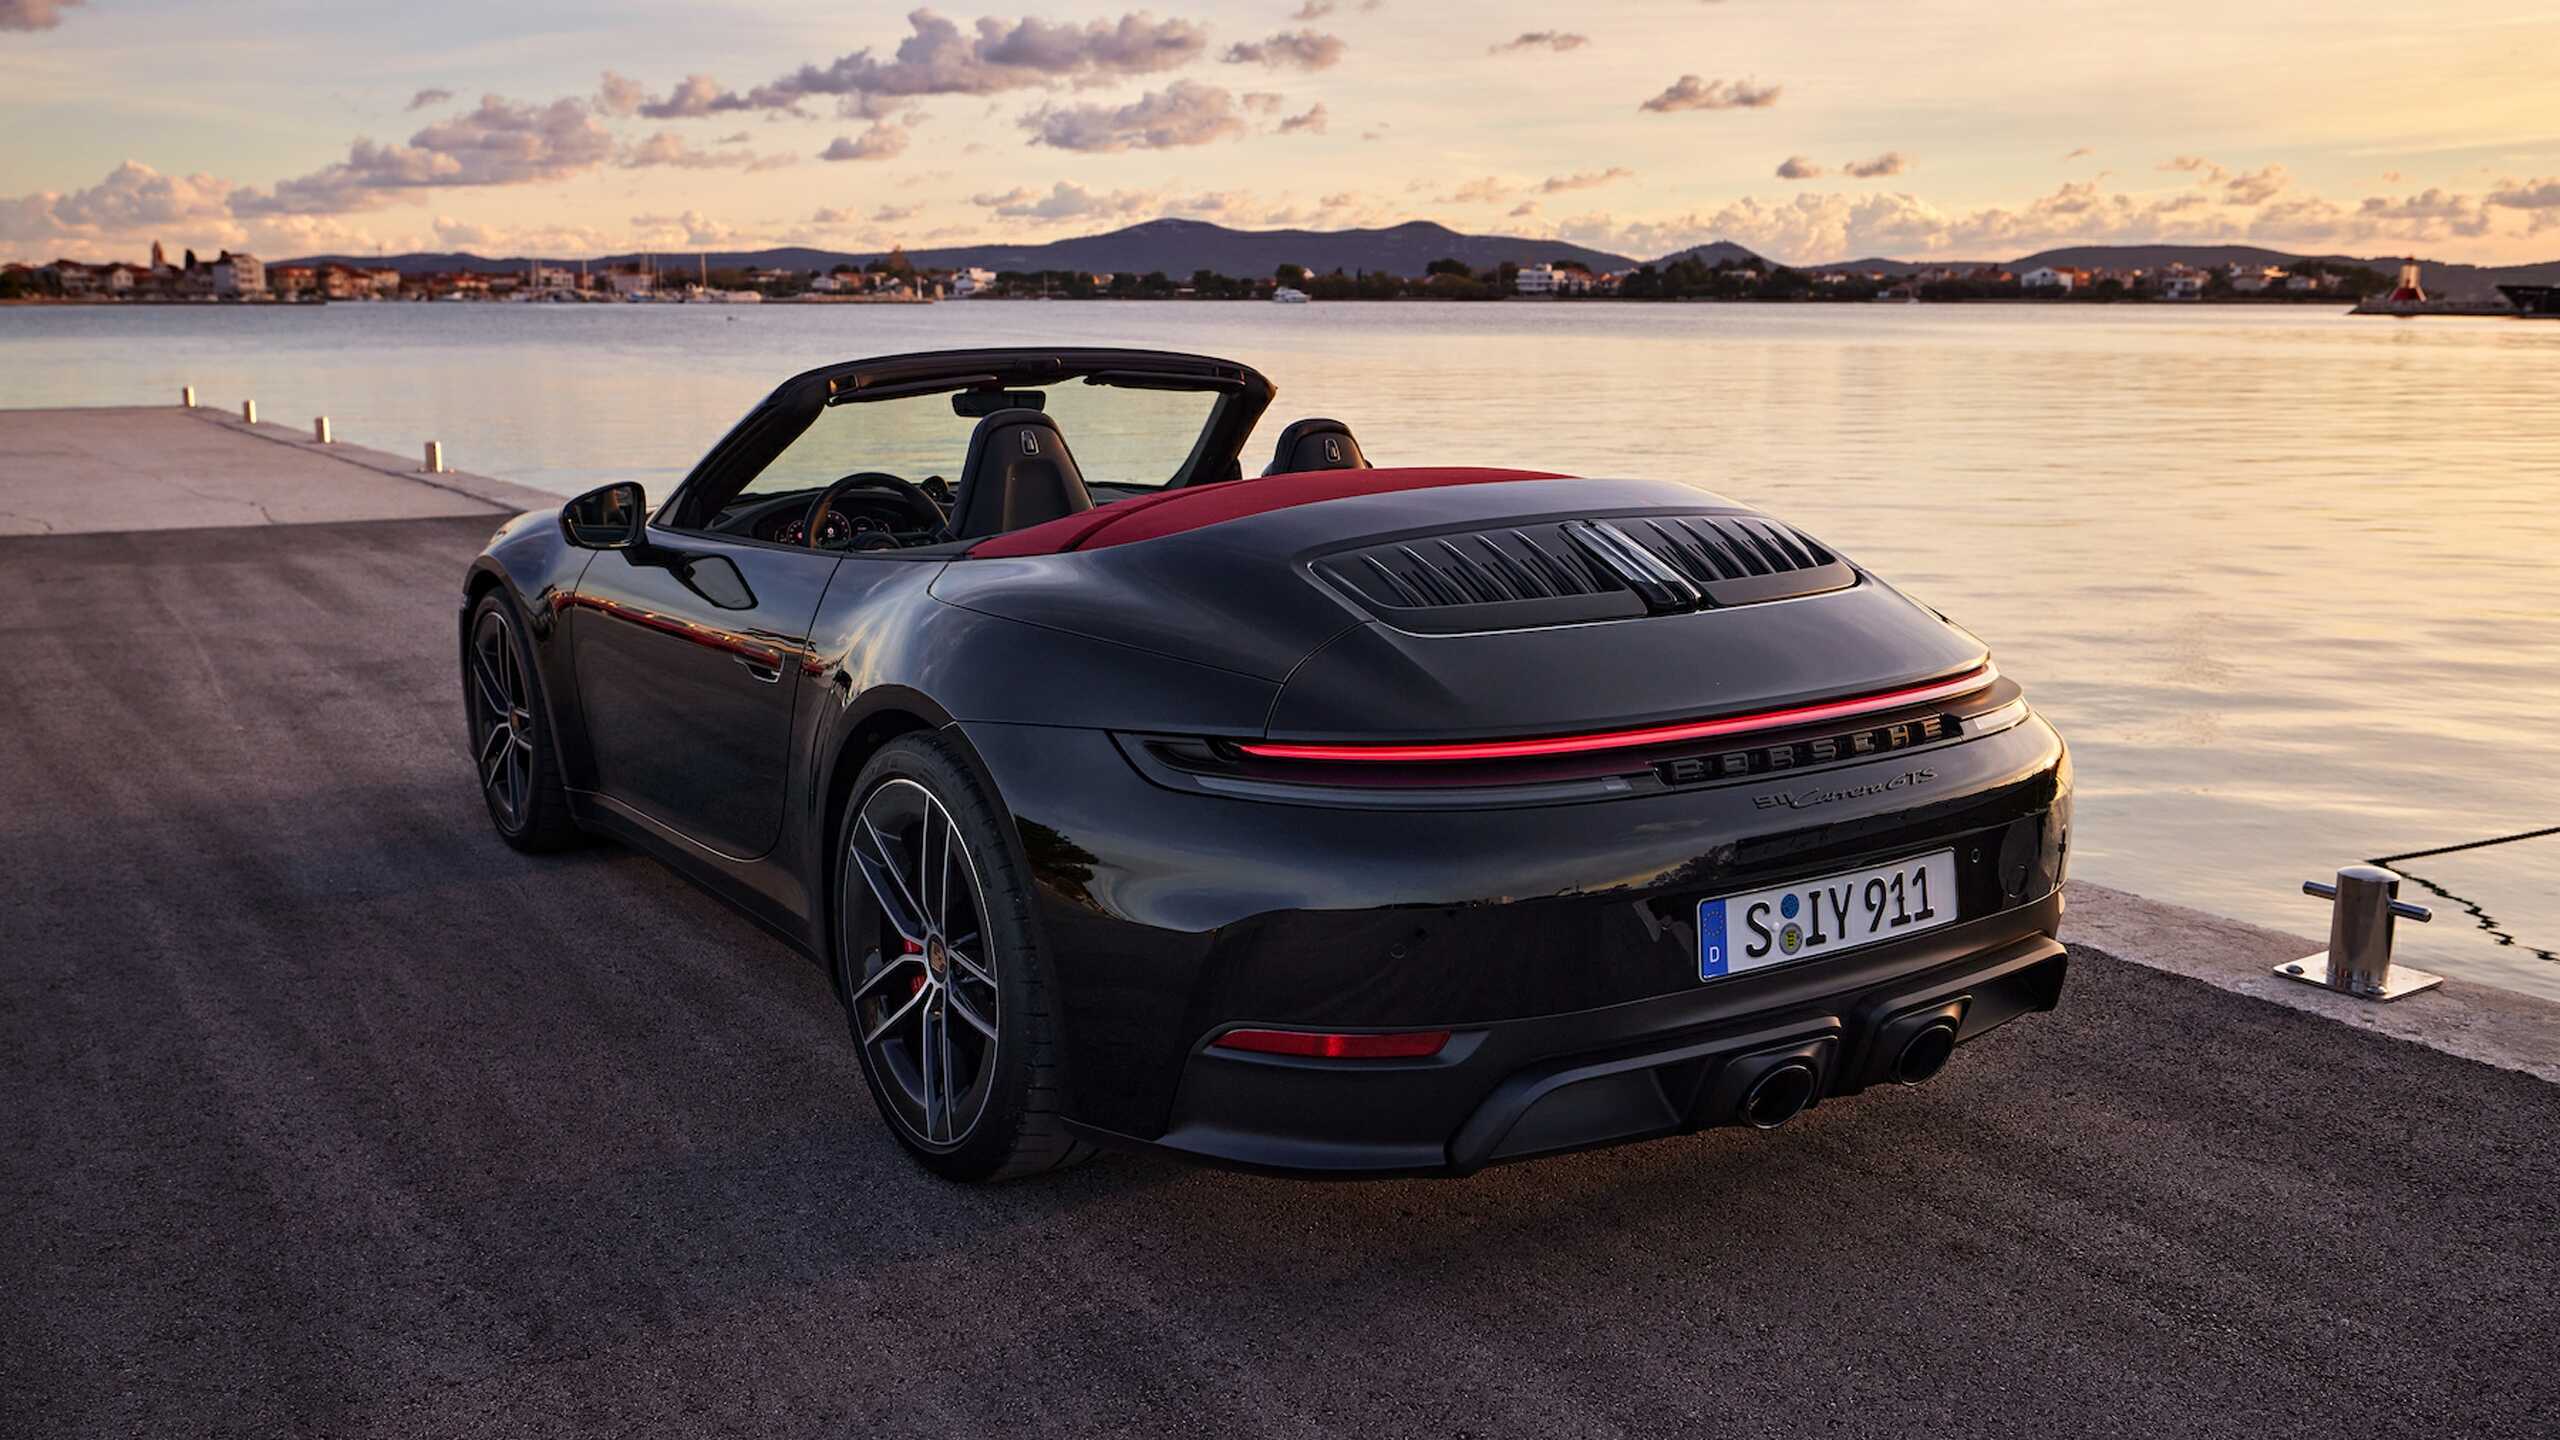 The Rear Profile Of The 911 Carrera GTS Cabriolet